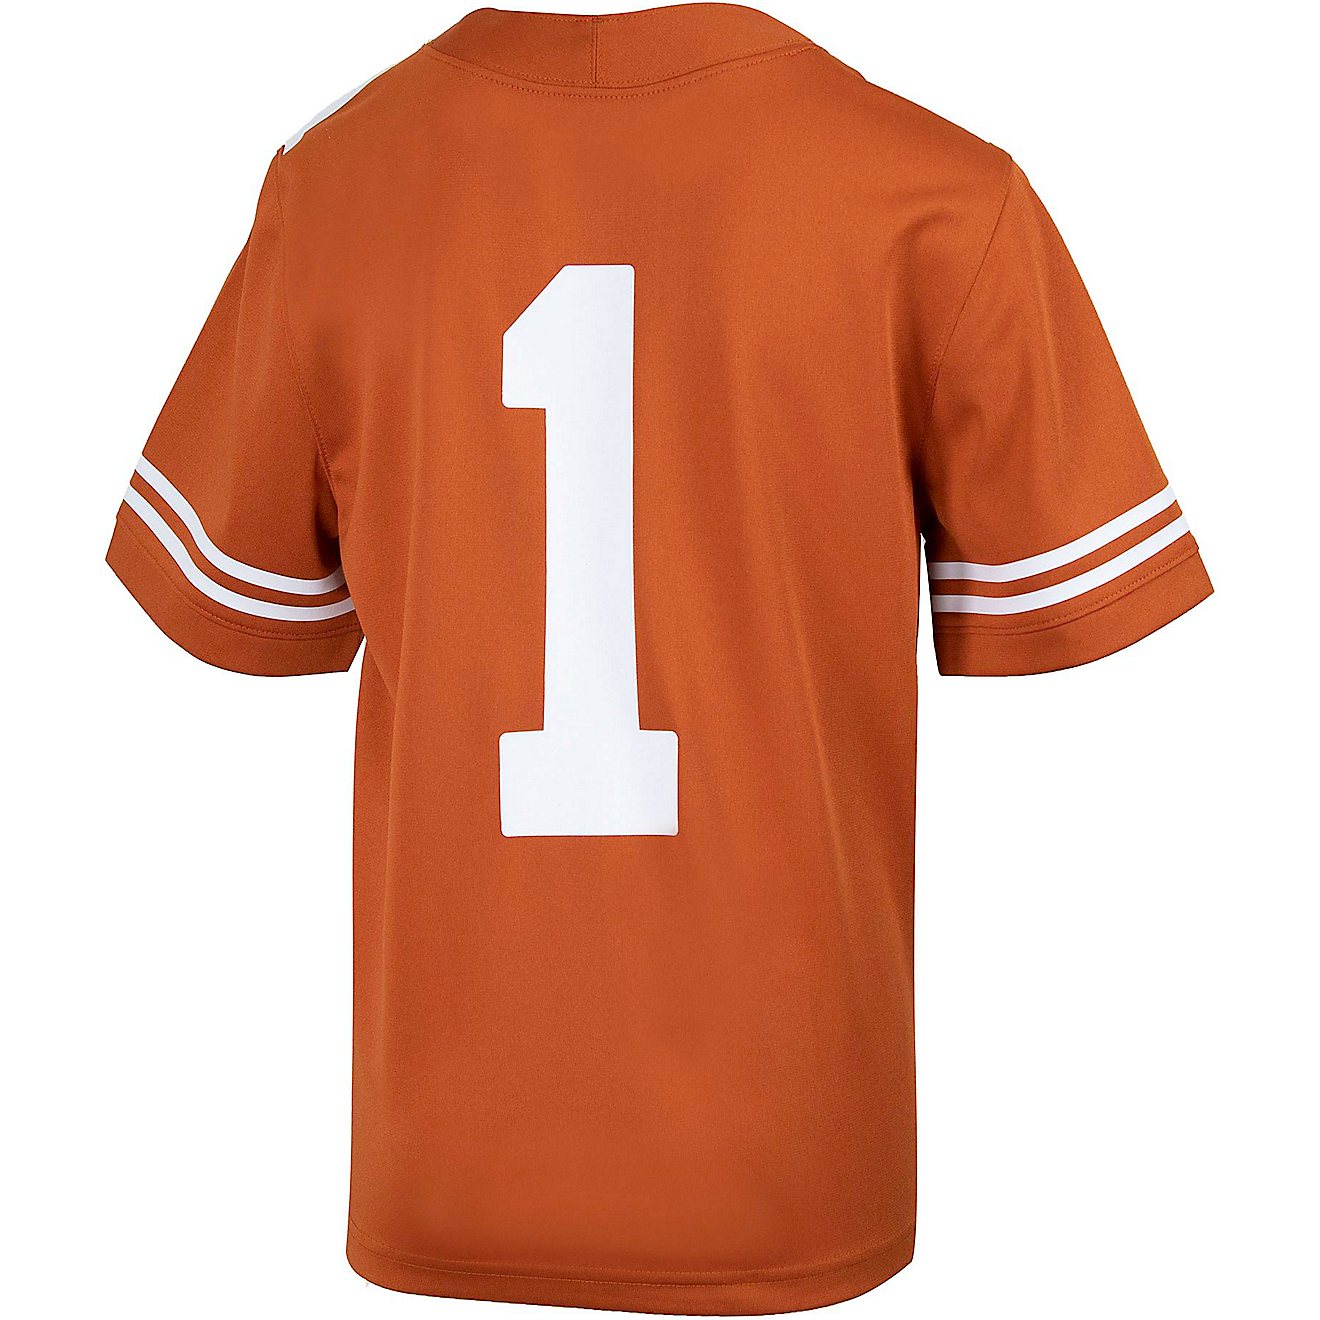 Nike Boys' University of Texas Young Athletes Replica Football Jersey                                                            - view number 2